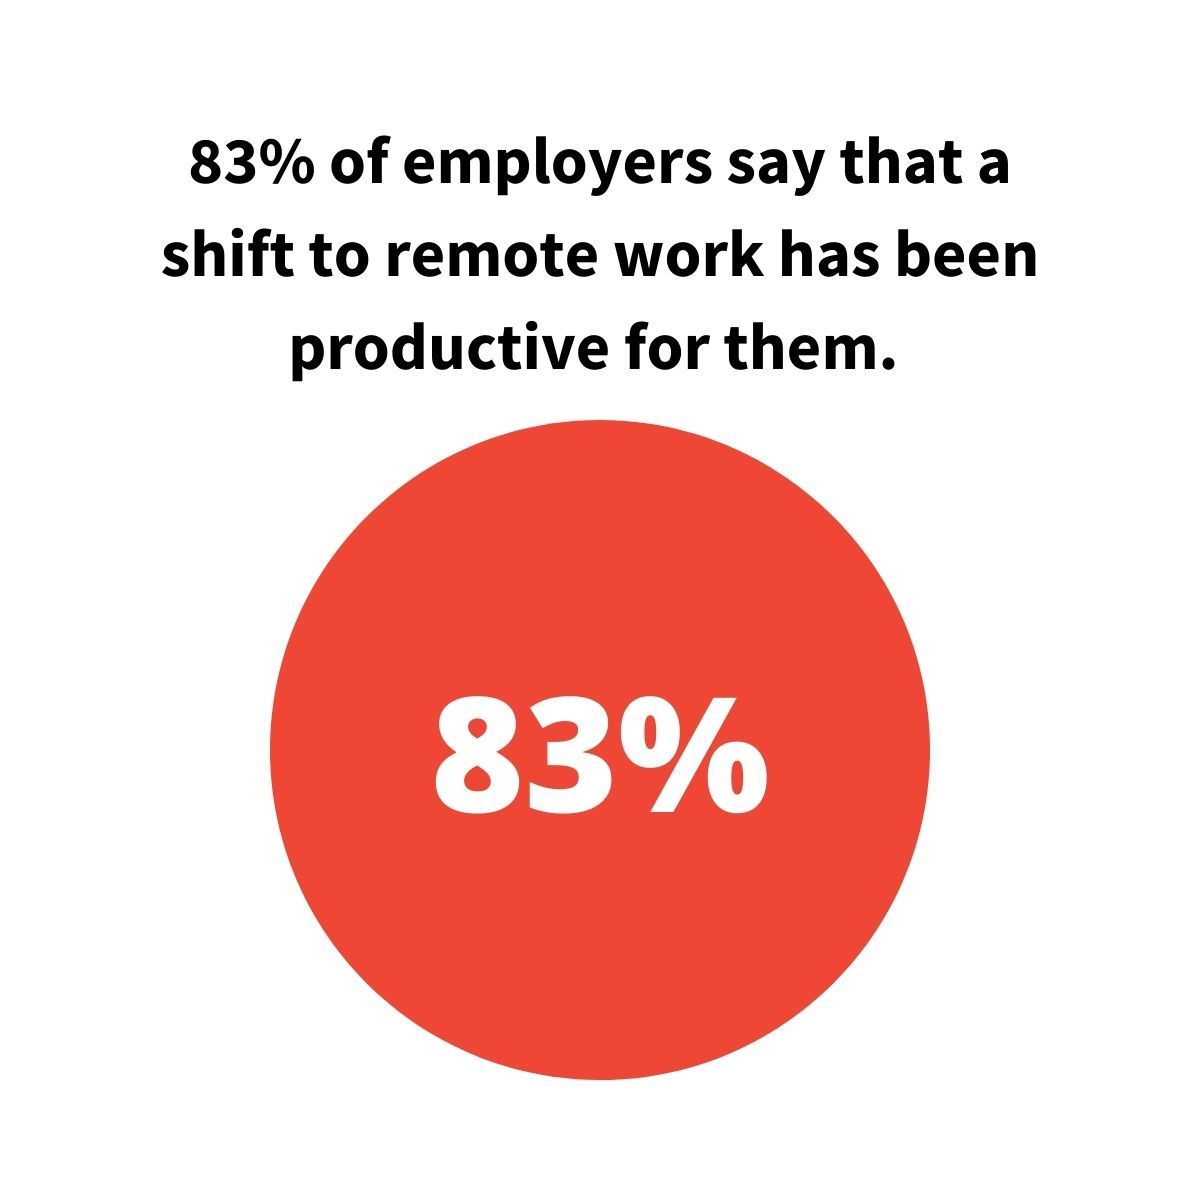 83 percent say that shift to remote work has been productive